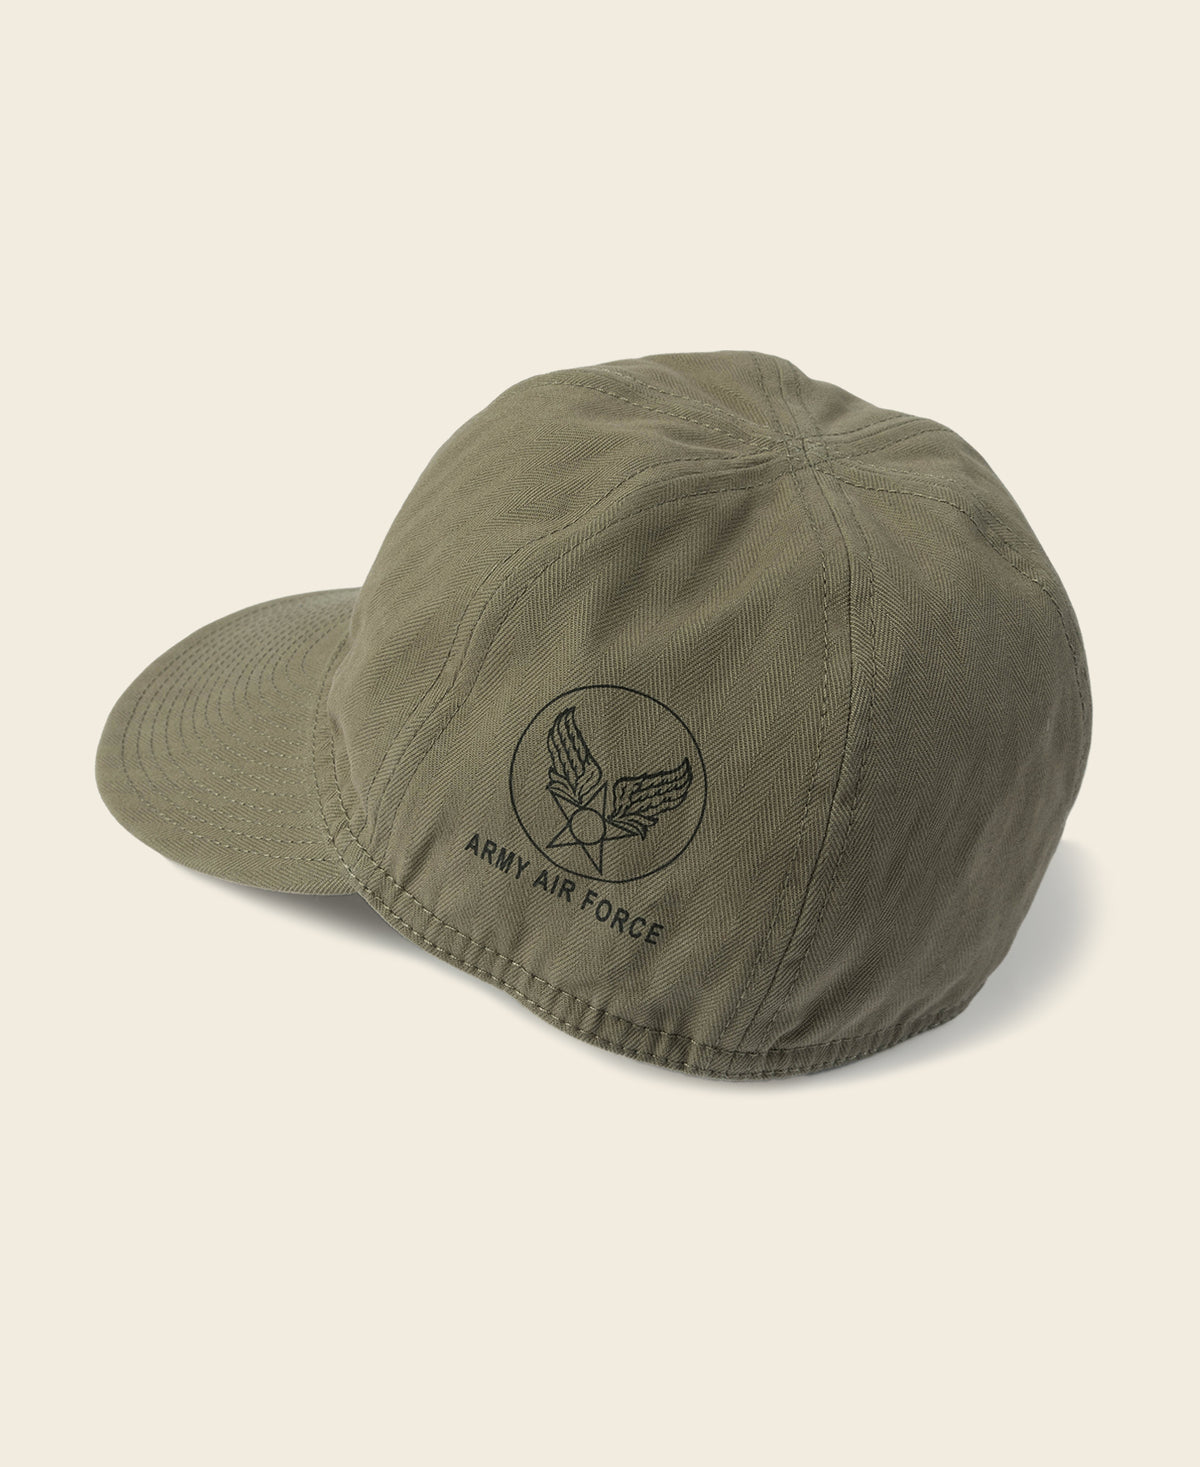 WWII USAAF Type A-3 Cap - Olive